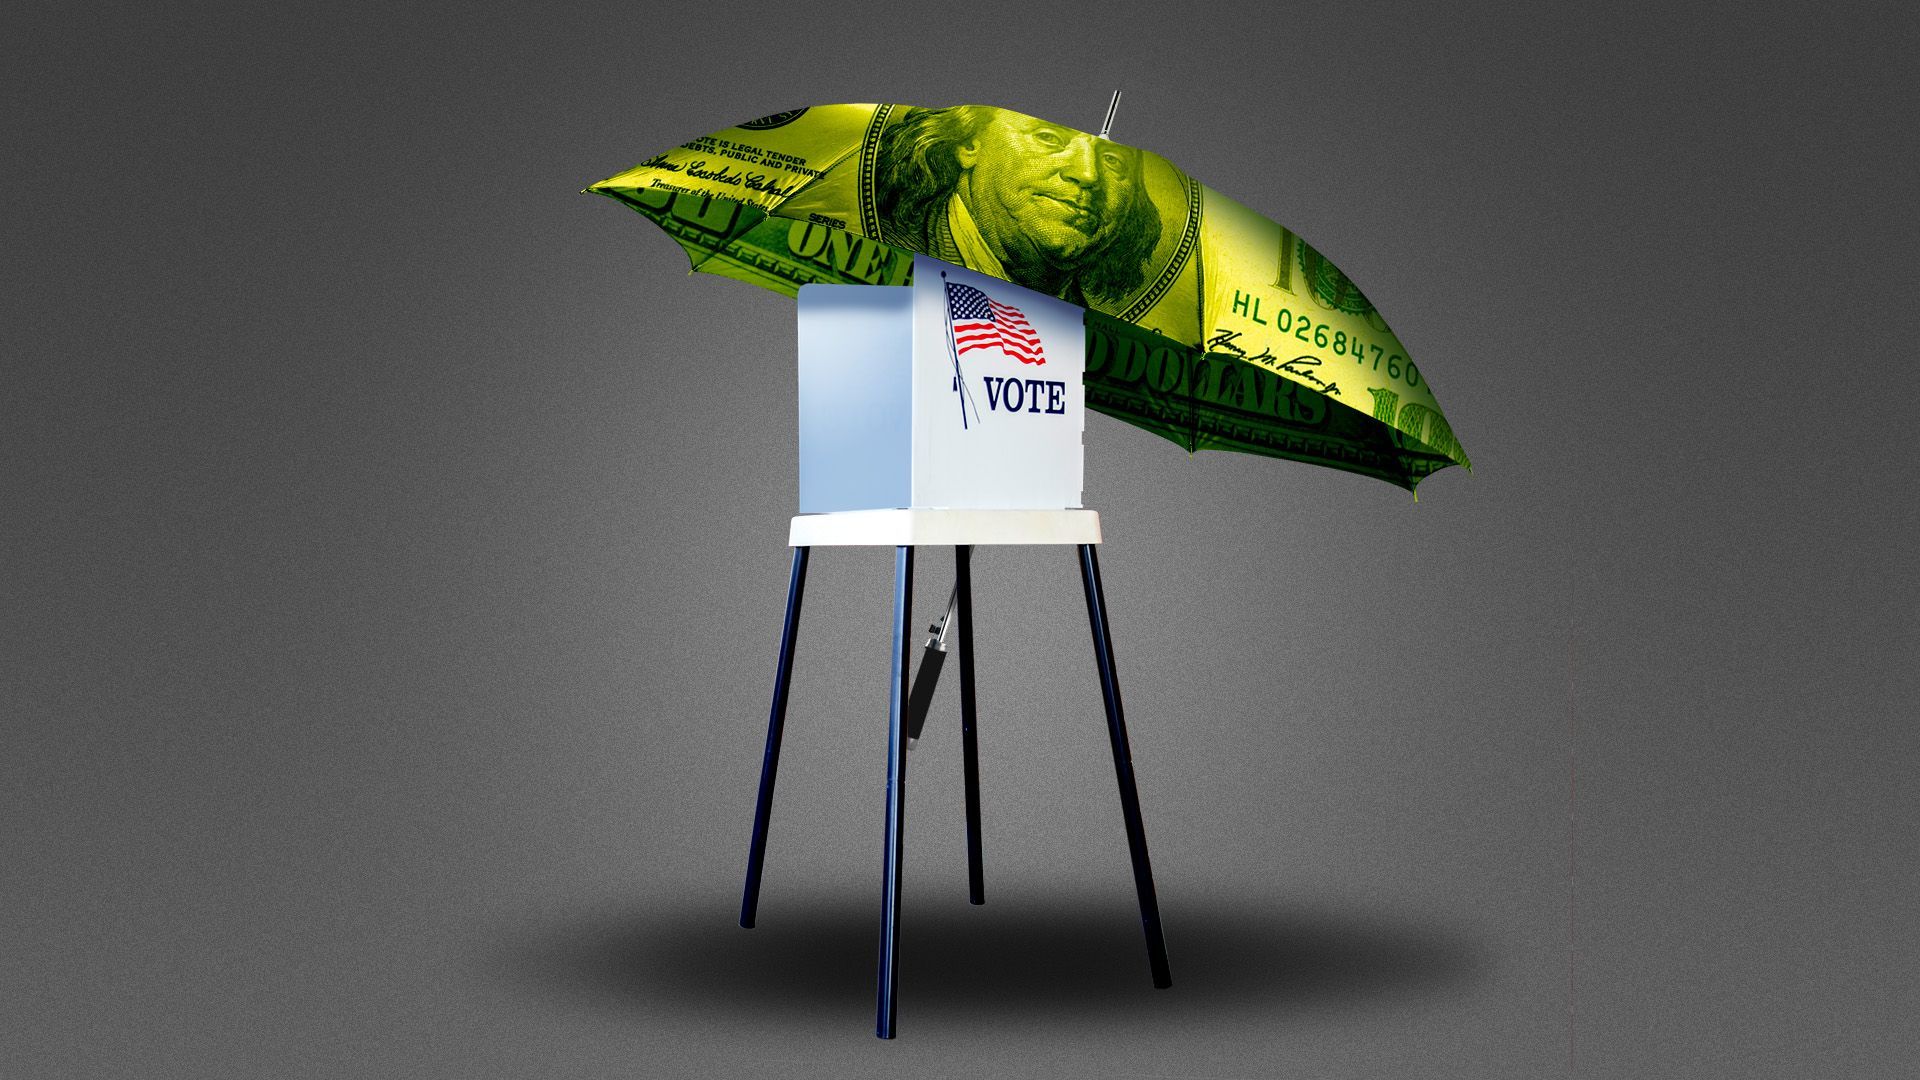 Illustration of an umbrella made of money covering a voting booth